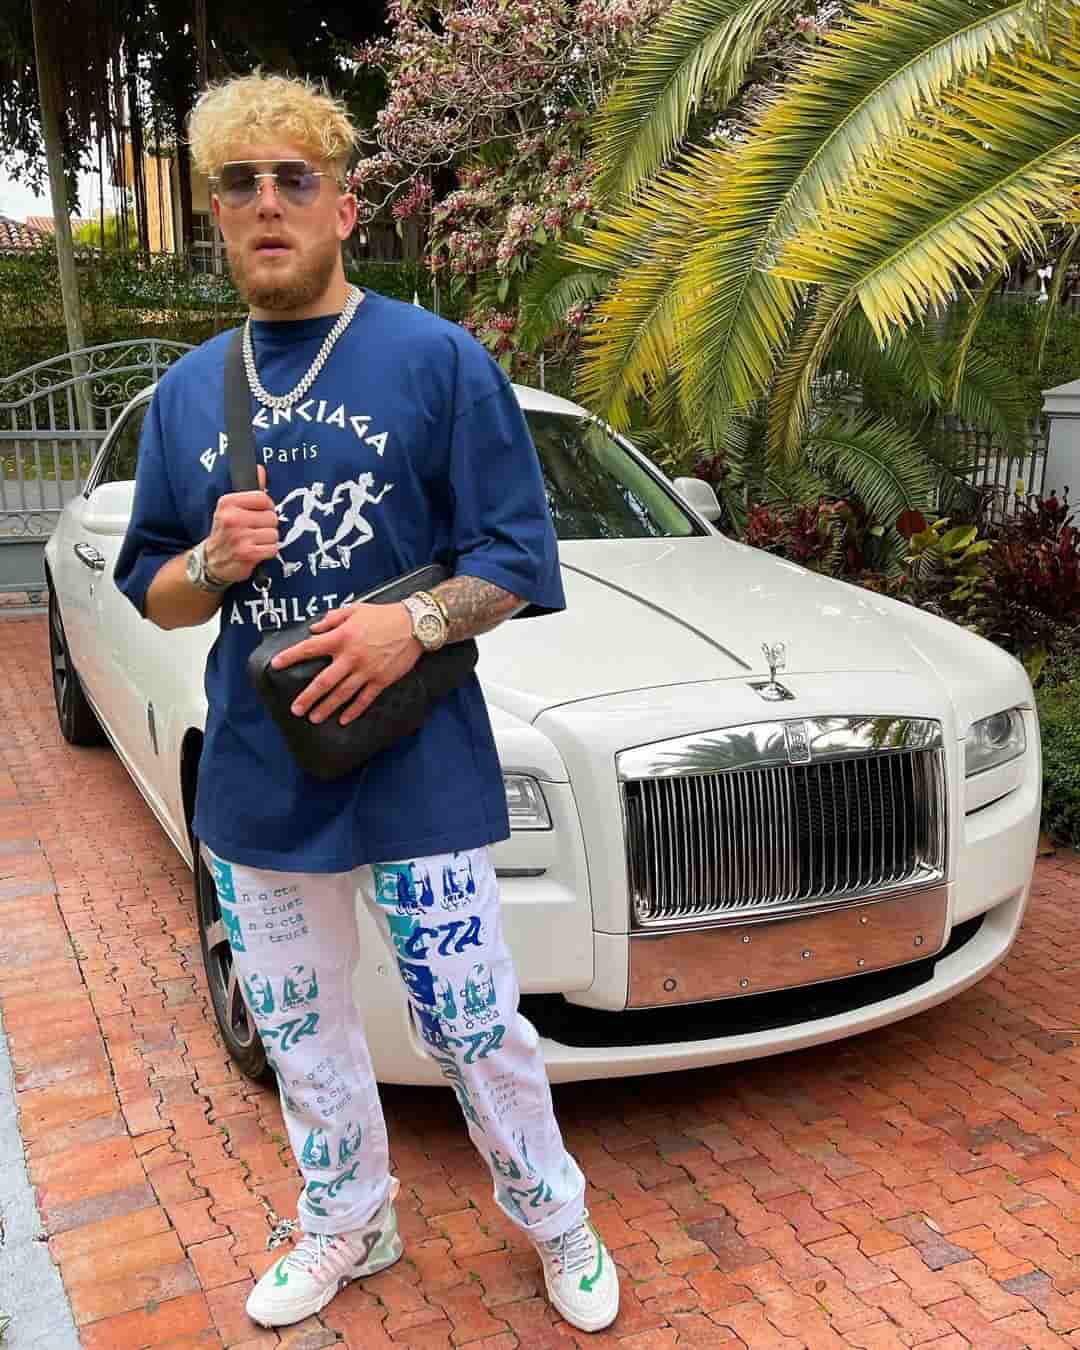 Jake Paul - Biography, Profile, Facts, and Career